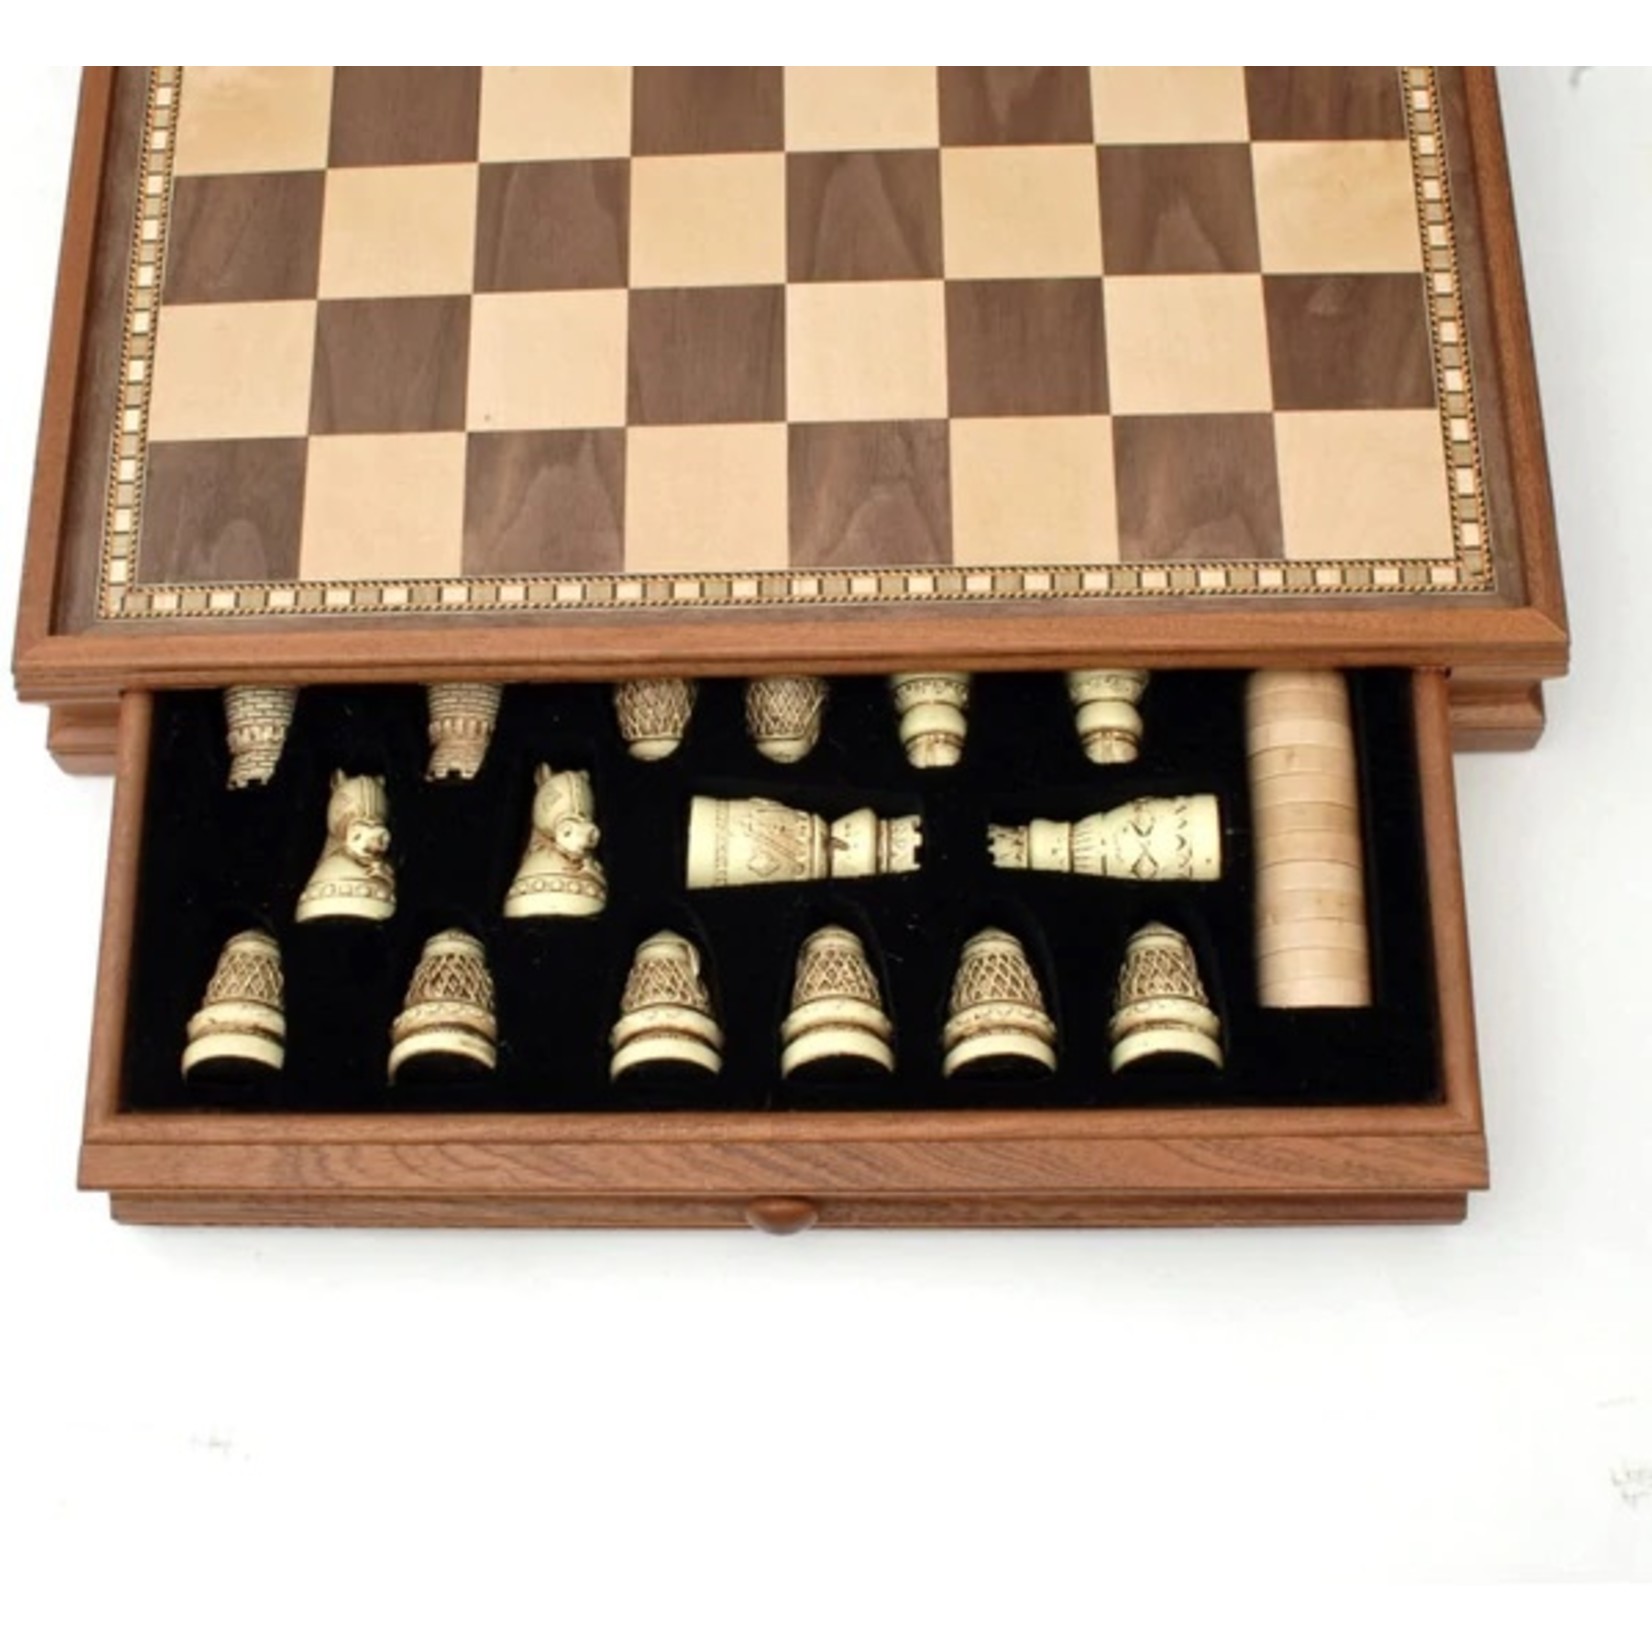 Wood Expressions Medieval Chess & Checkers with Storage Drawers